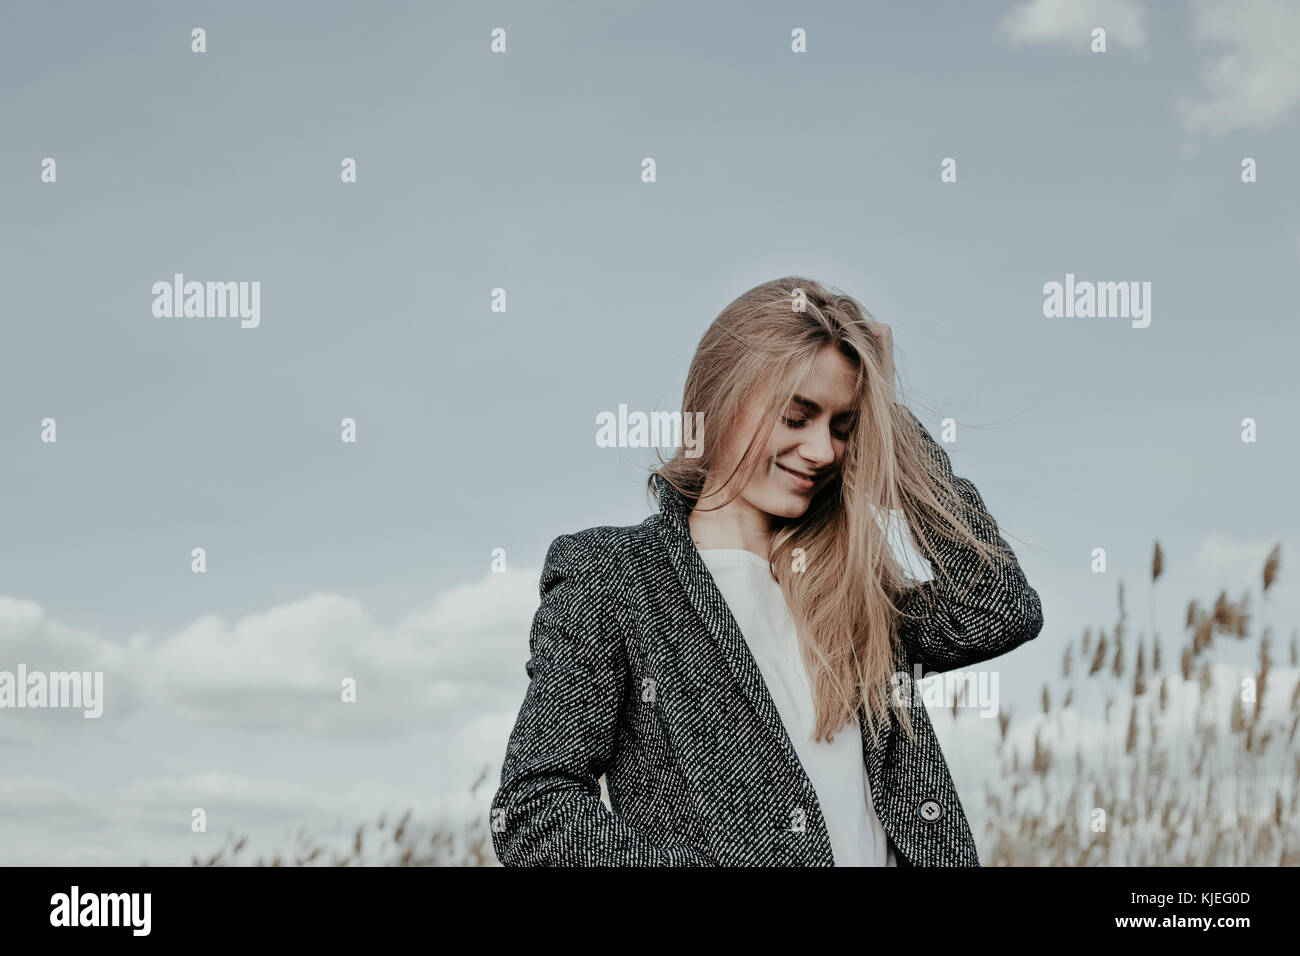 Pretty young and slim woman with long blonde hair posing at camera outdoor on sky background. Cute girl smiling and looking down. Copy space. Stock Photo